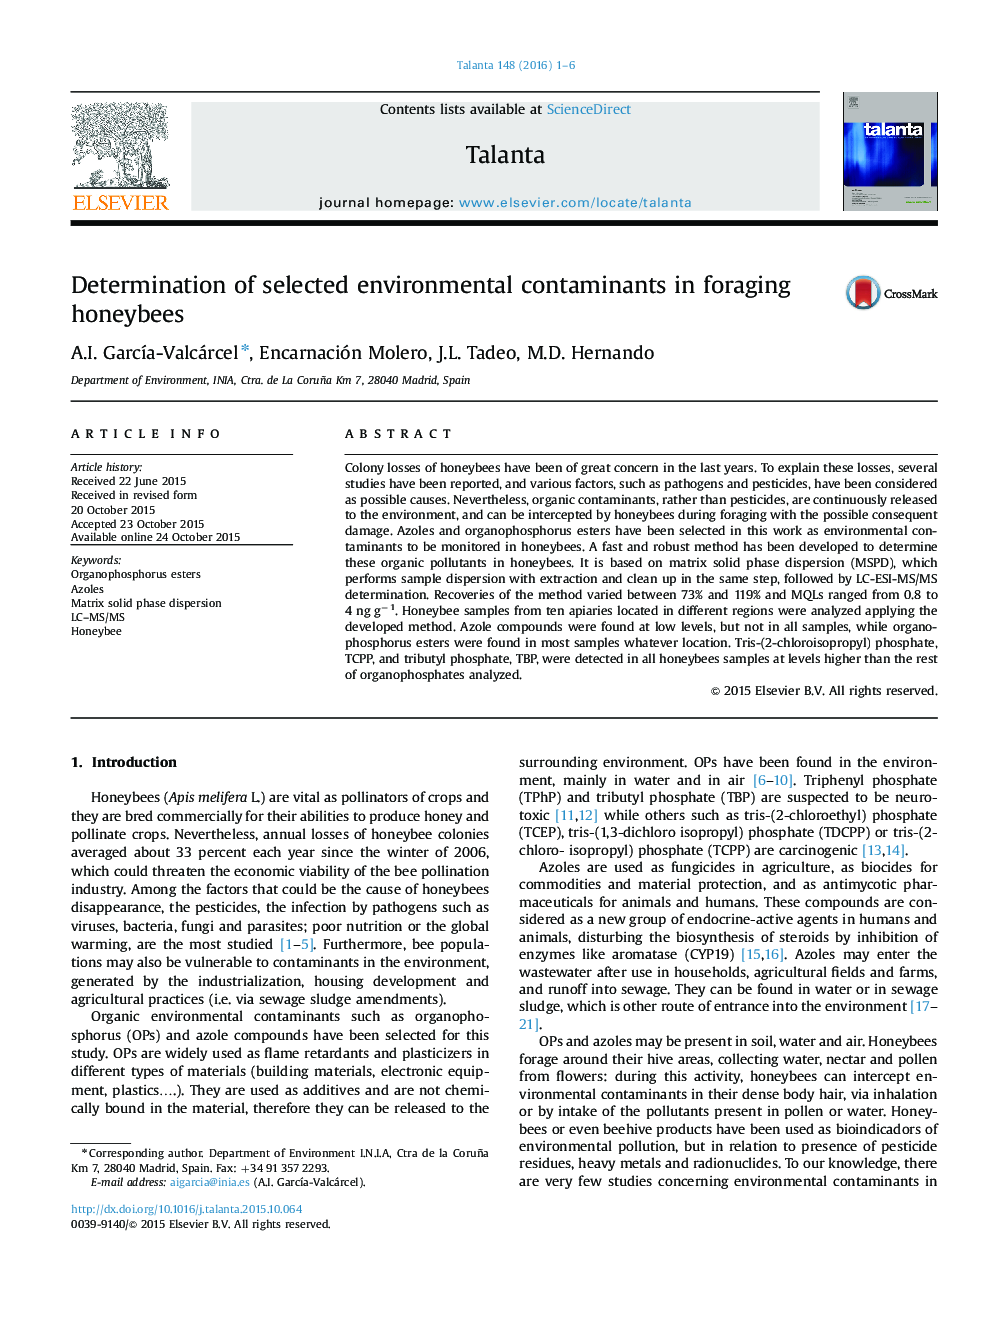 Determination of selected environmental contaminants in foraging honeybees